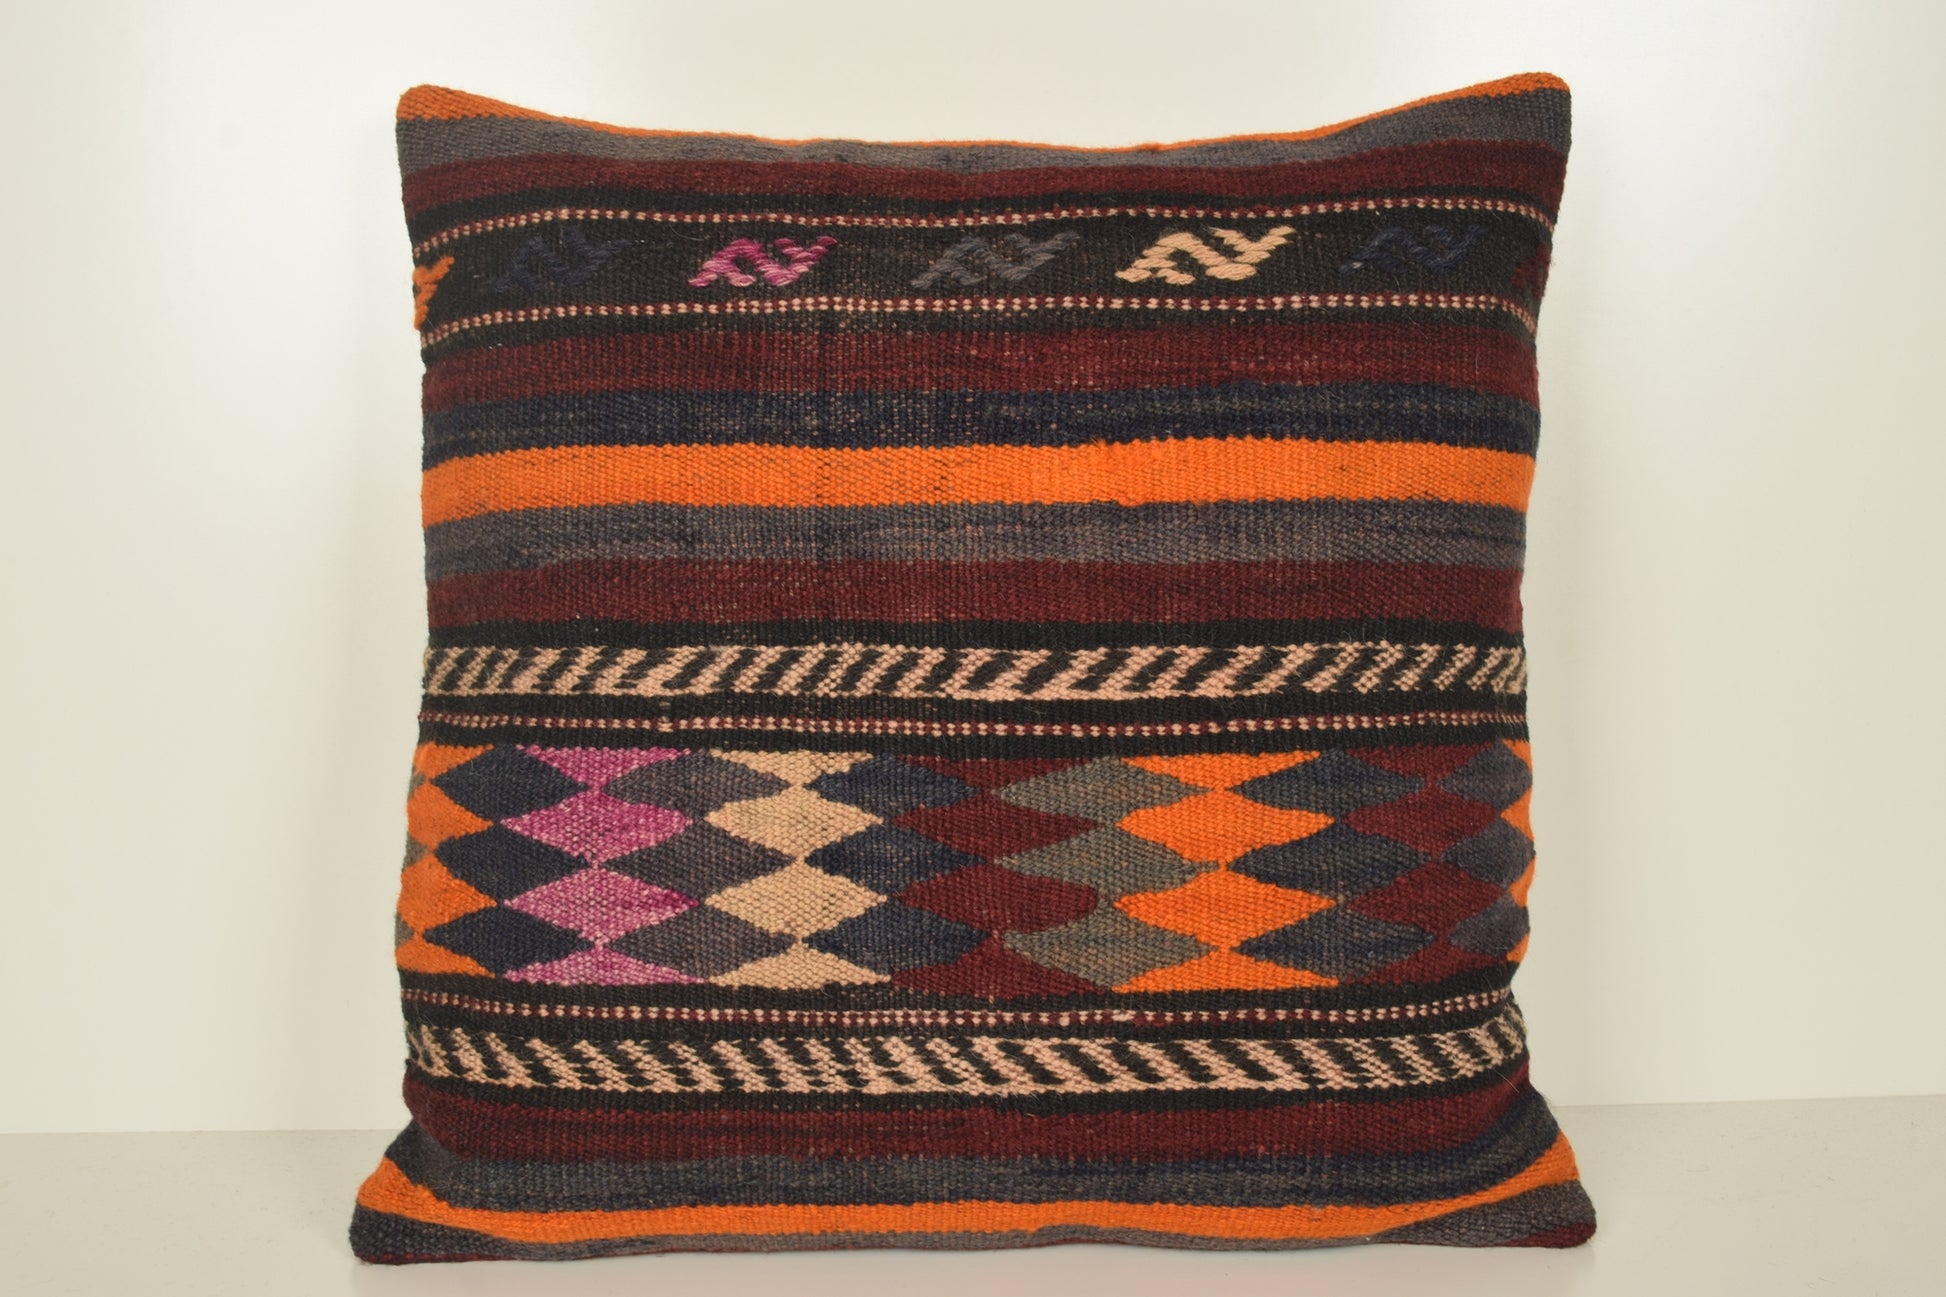 Turkish Outdoor Pillows A00890 Cottage pillows Decorator cushion covers 24x24